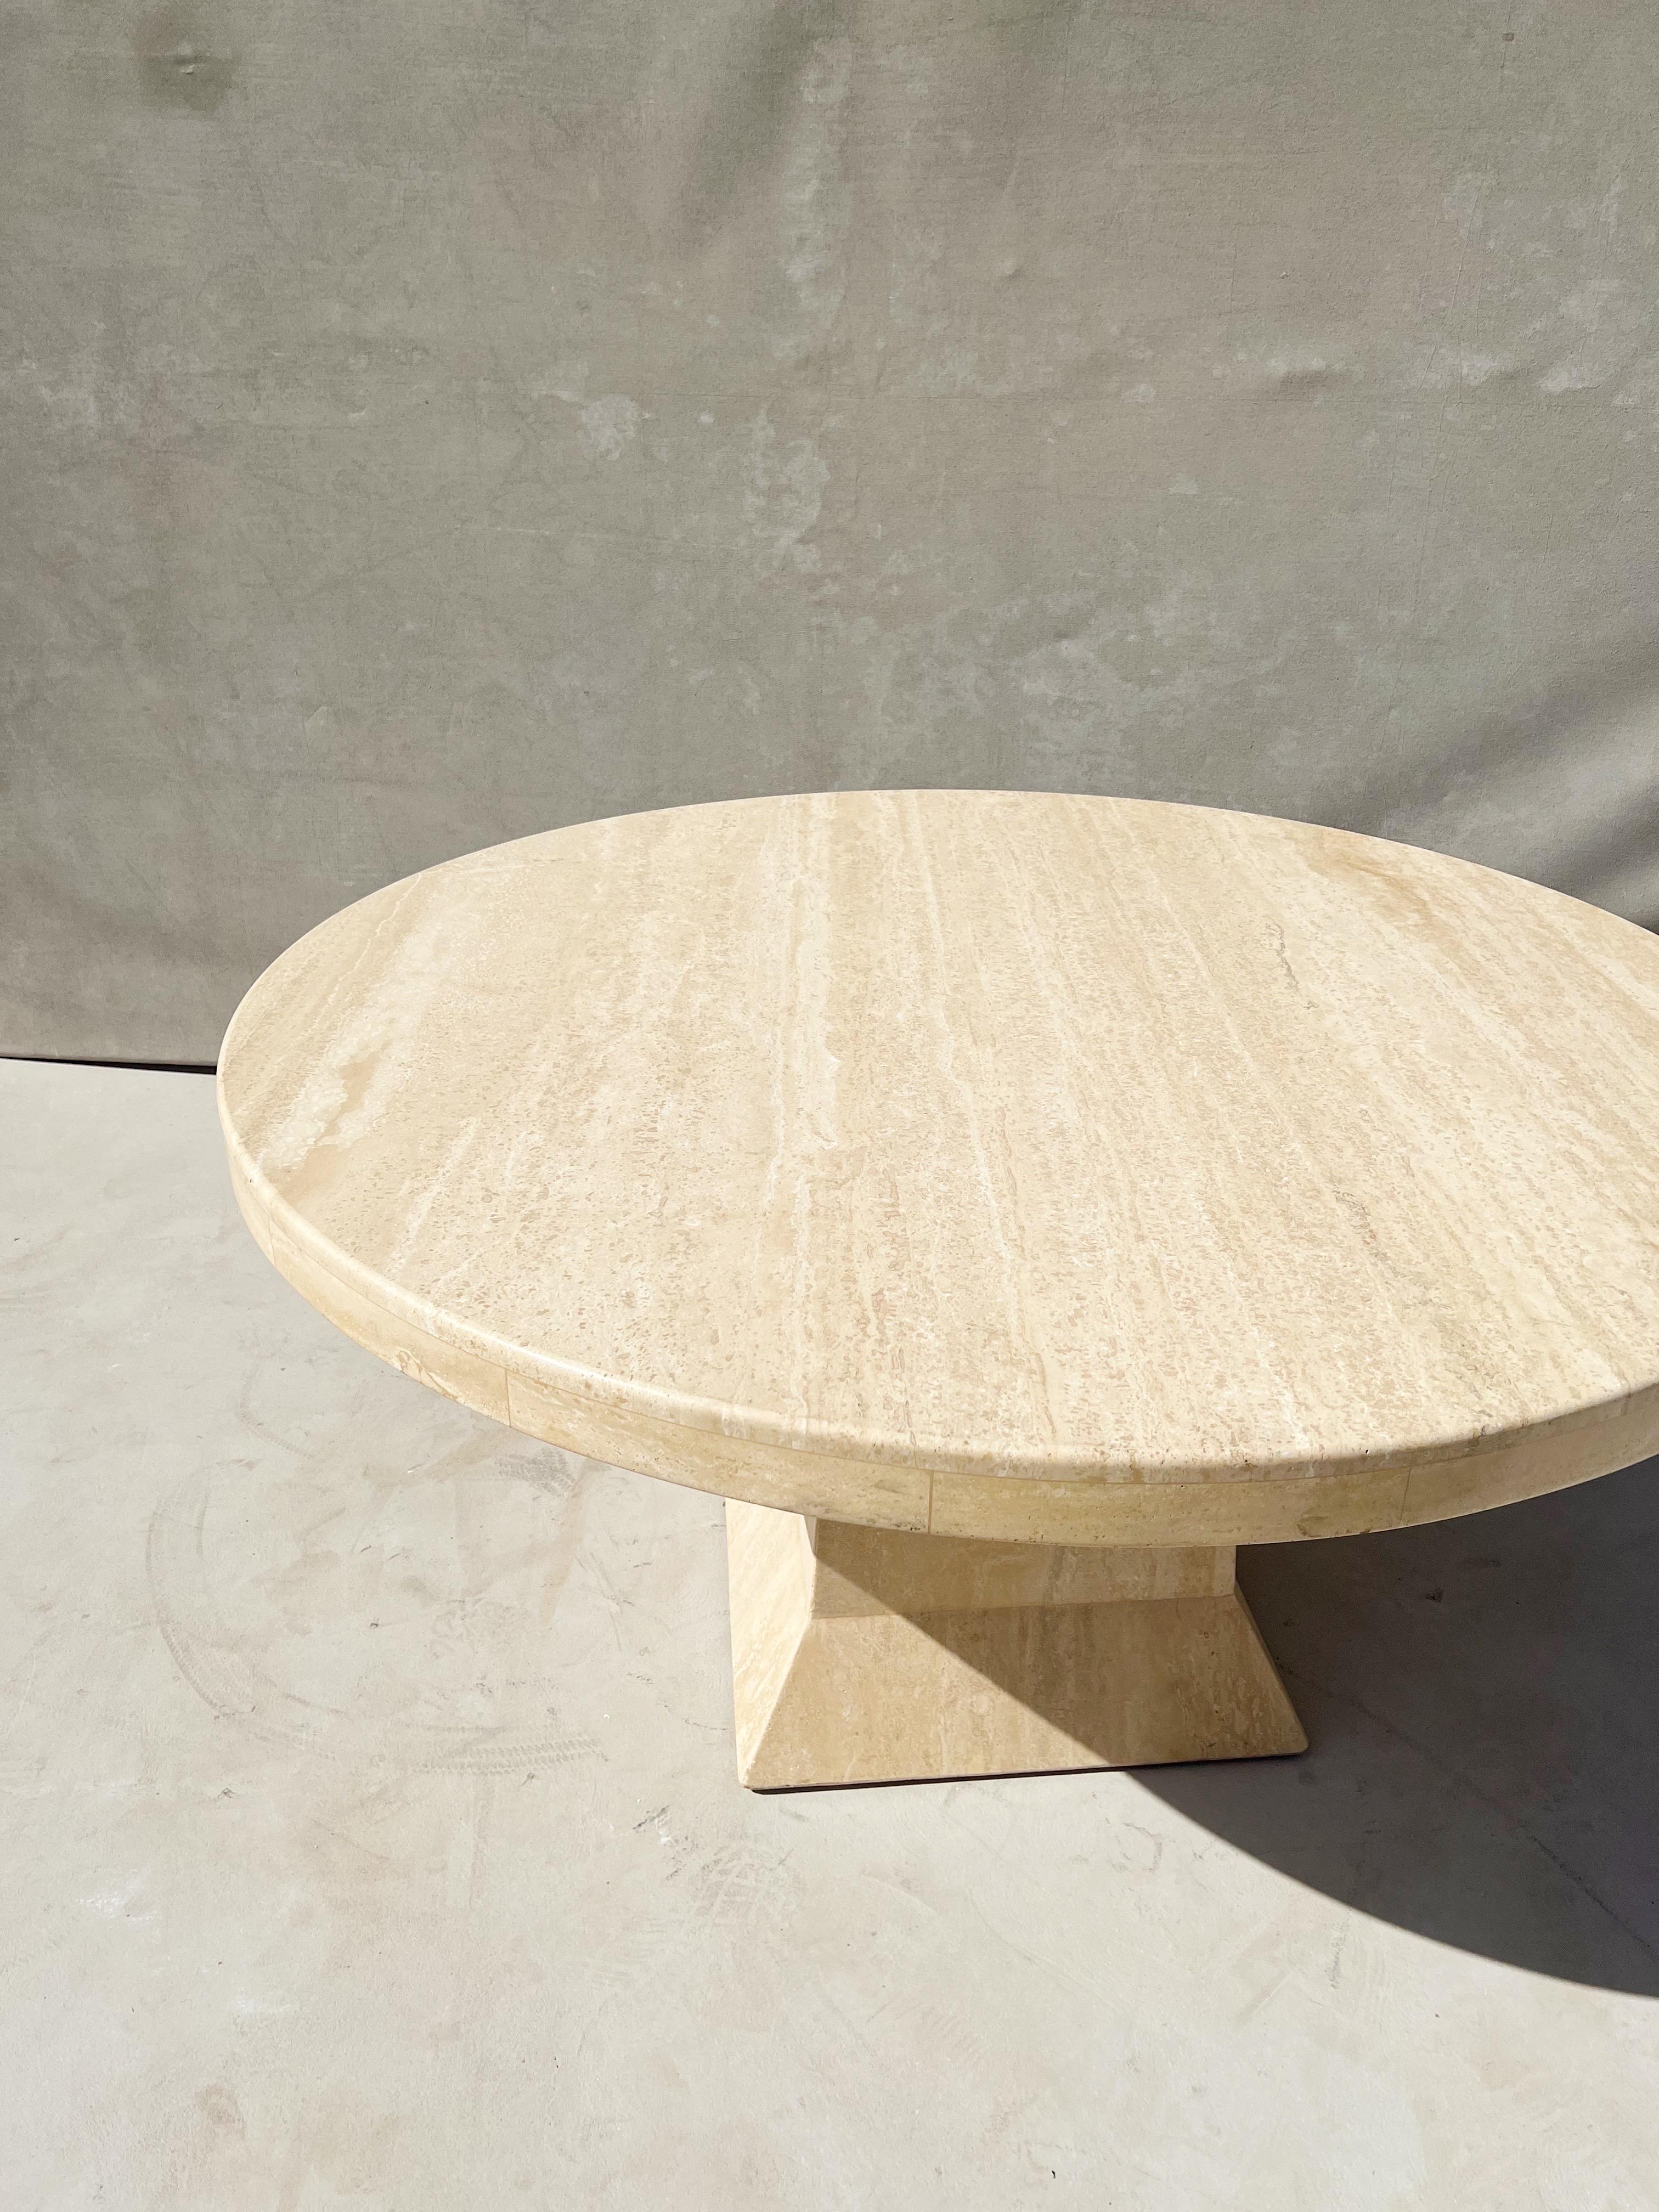 Hand-Crafted Vintage Italian Travertine Round Dining Table with Sculptural Base For Sale